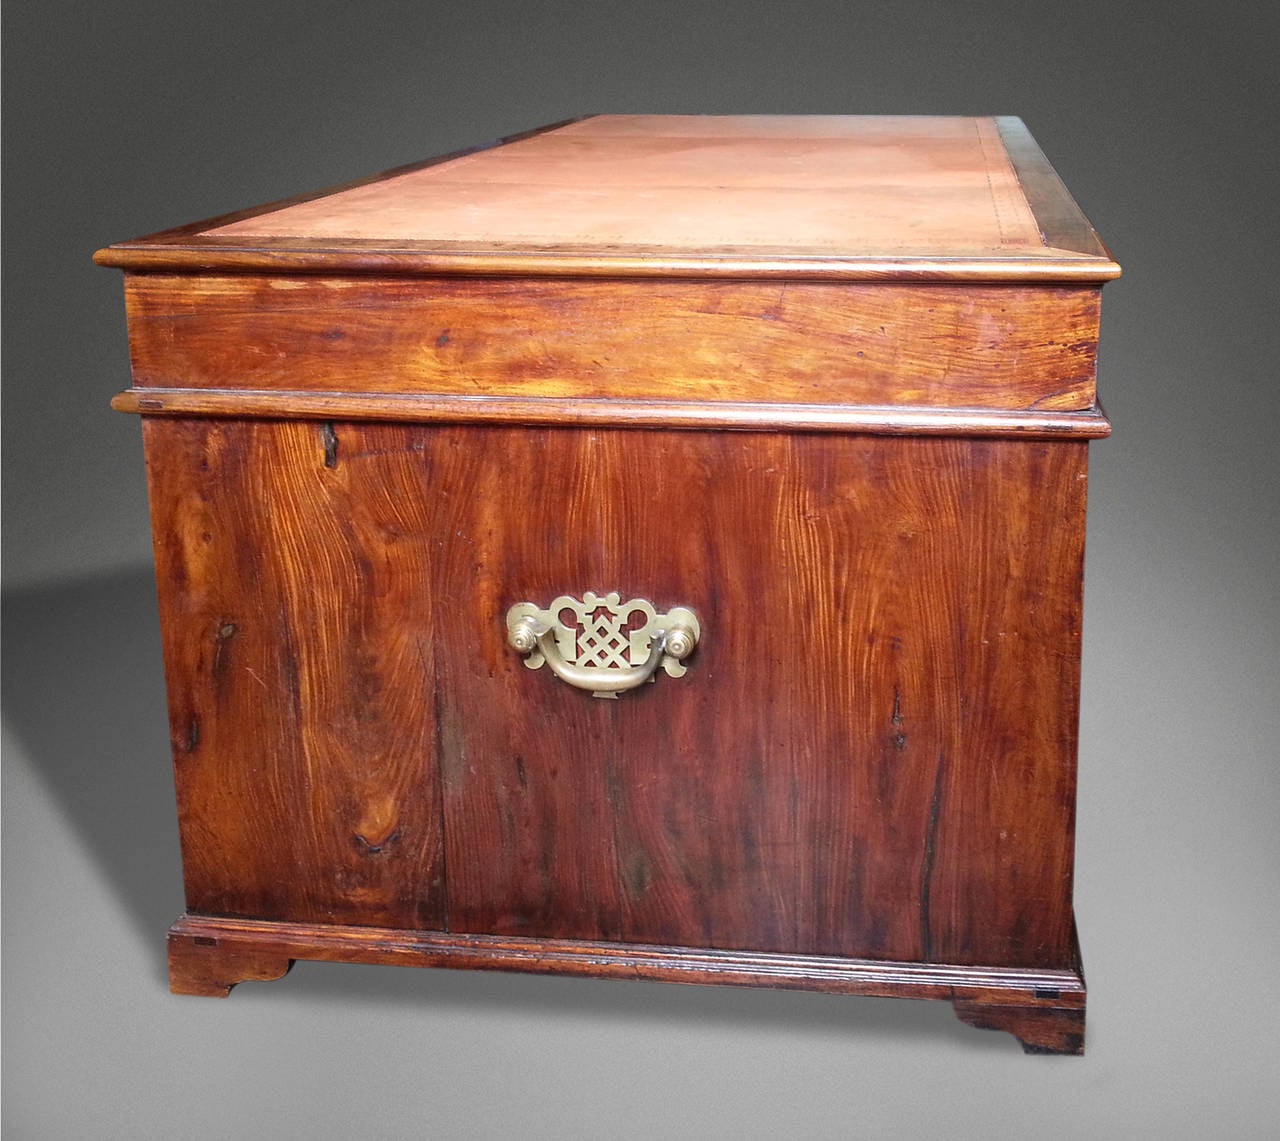 A Very Rare Mid-18th Century Huanghuali Wood Chinese Desk in the English Taste For Sale 3